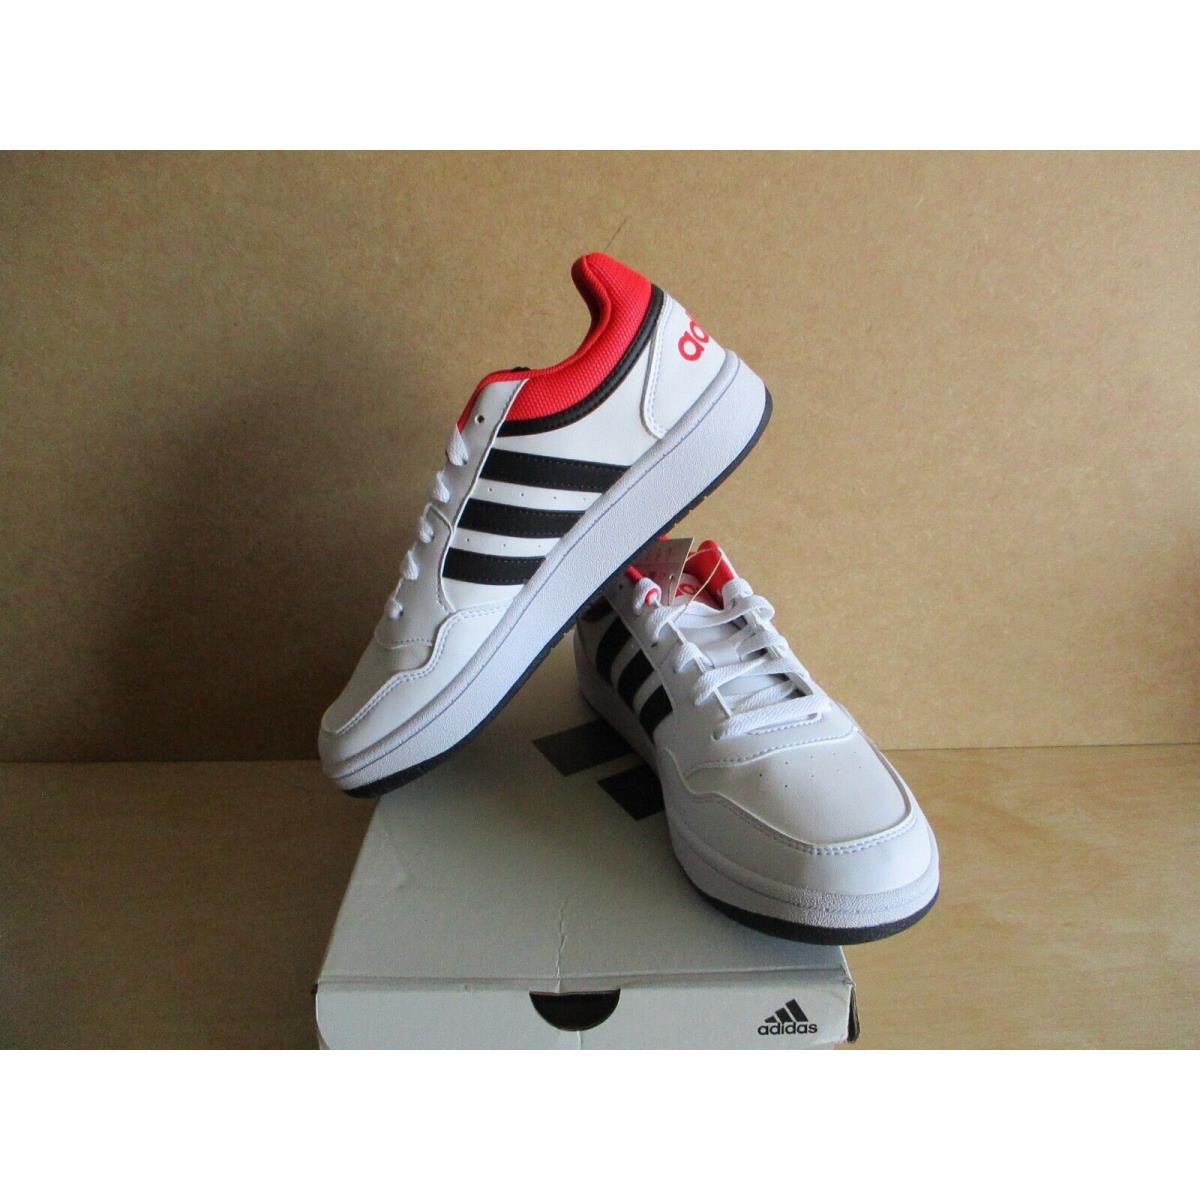 Adidas shoes Hoops - White 0